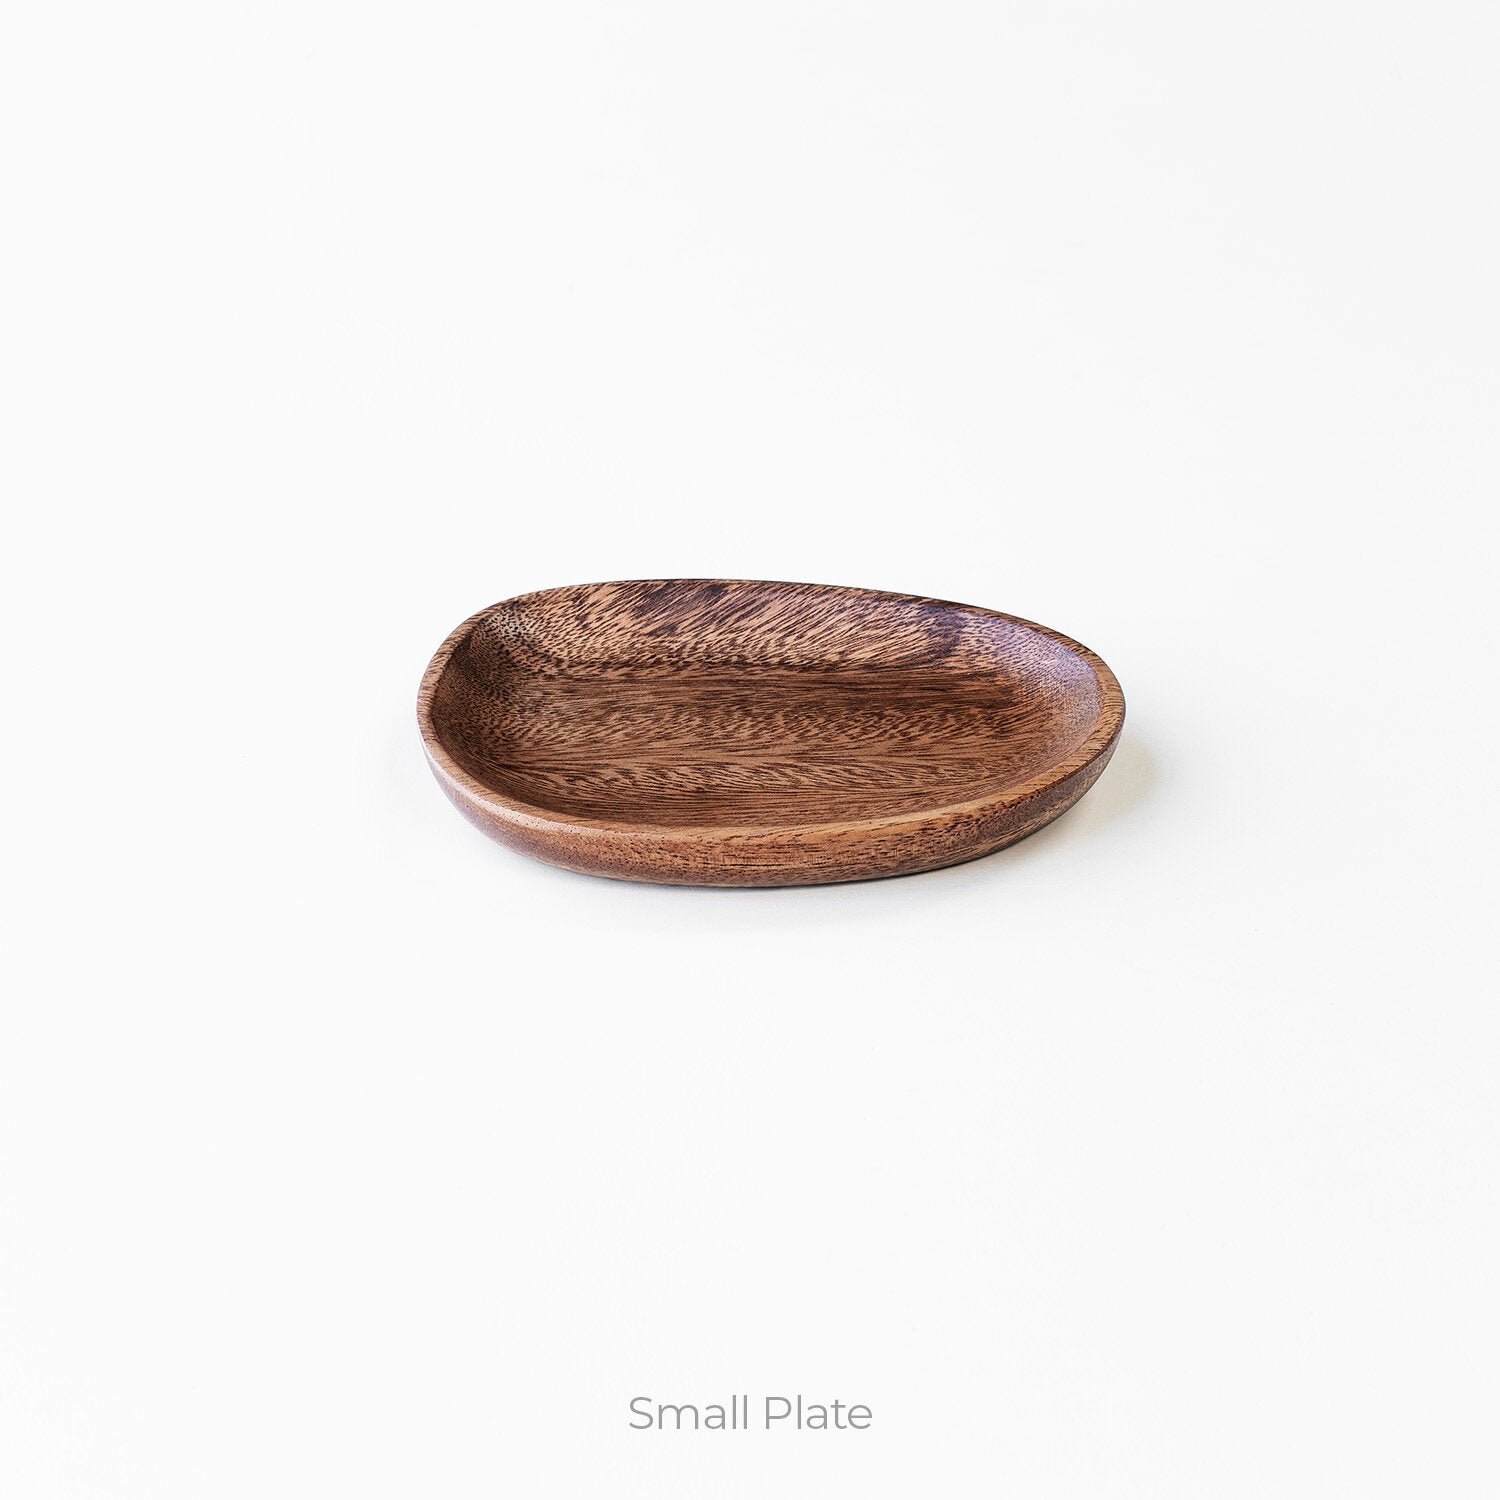 Small wooden plate